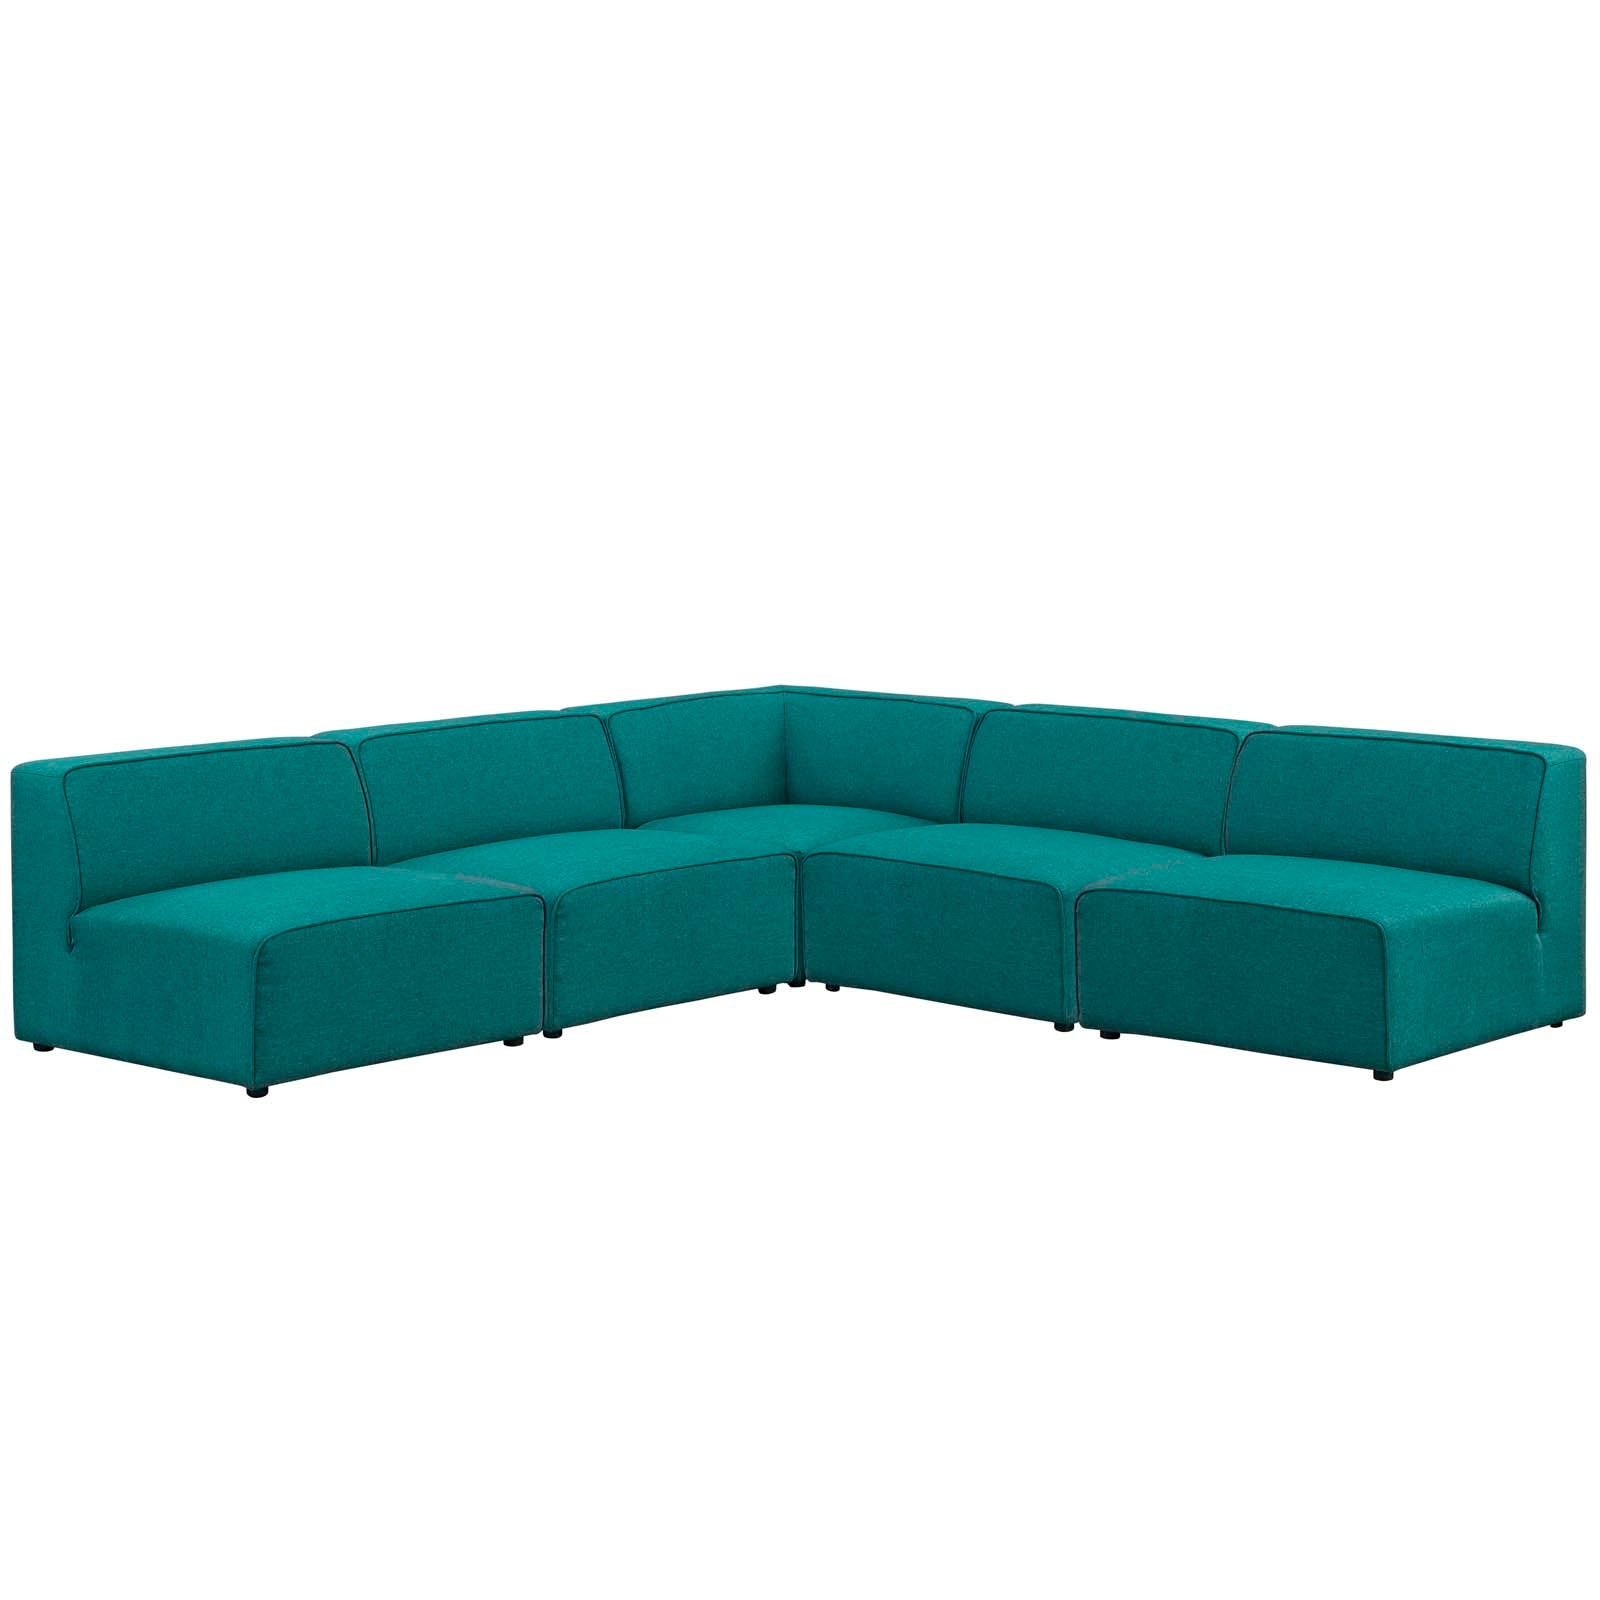 Modway Sectional Sofas - Mingle 5 Piece Upholstered Fabric Armless Sectional Sofa Set Teal